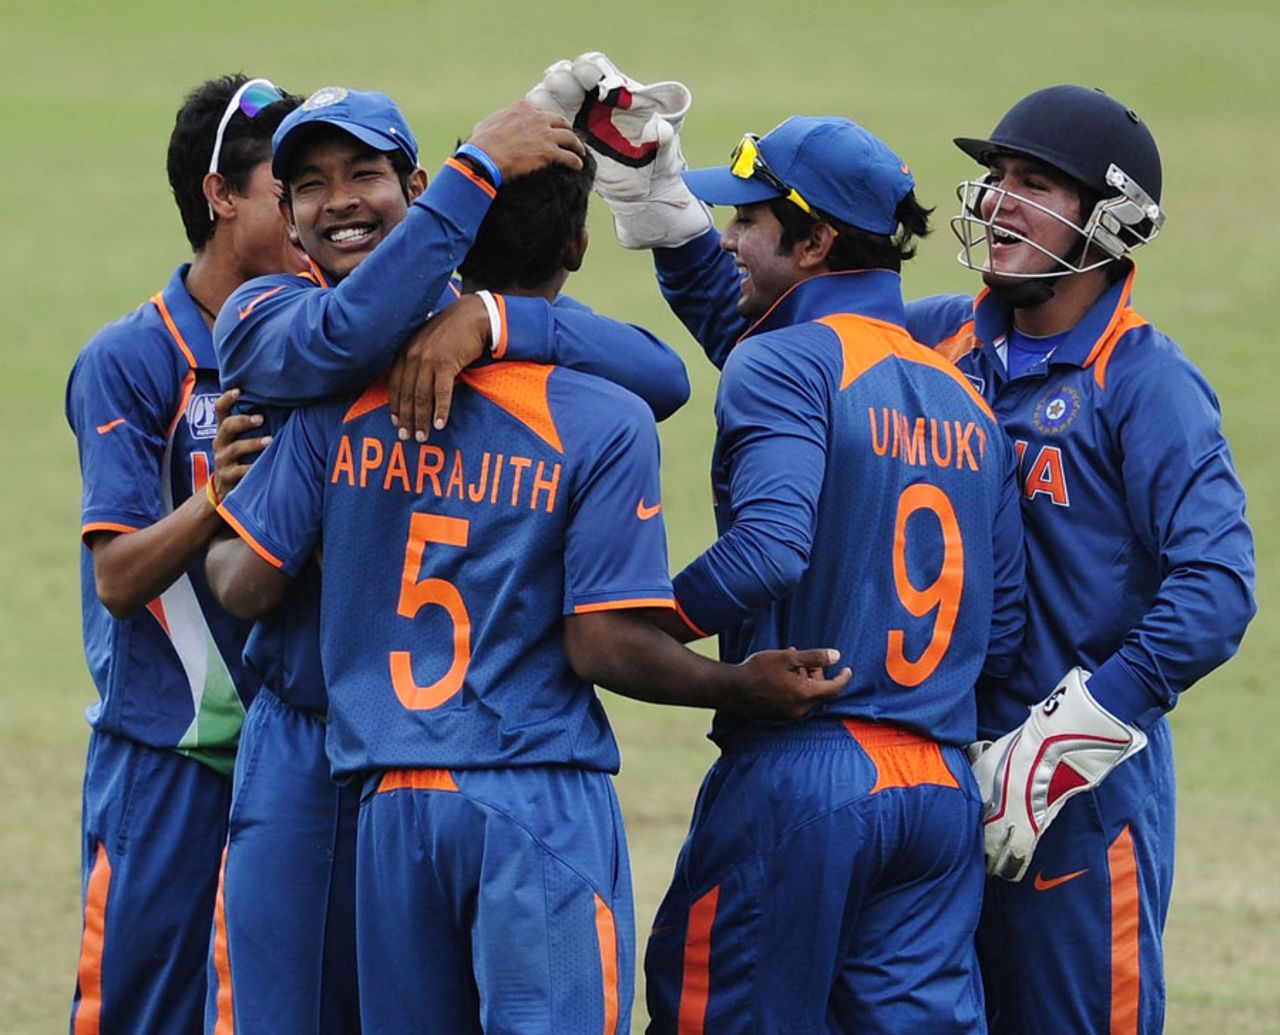 India's bowlers put in a commanding performance to restrict Pakistan's batsmen , India v Pakistan, quarter-final, ICC Under-19 World Cup, Townsville, August 20, 2012